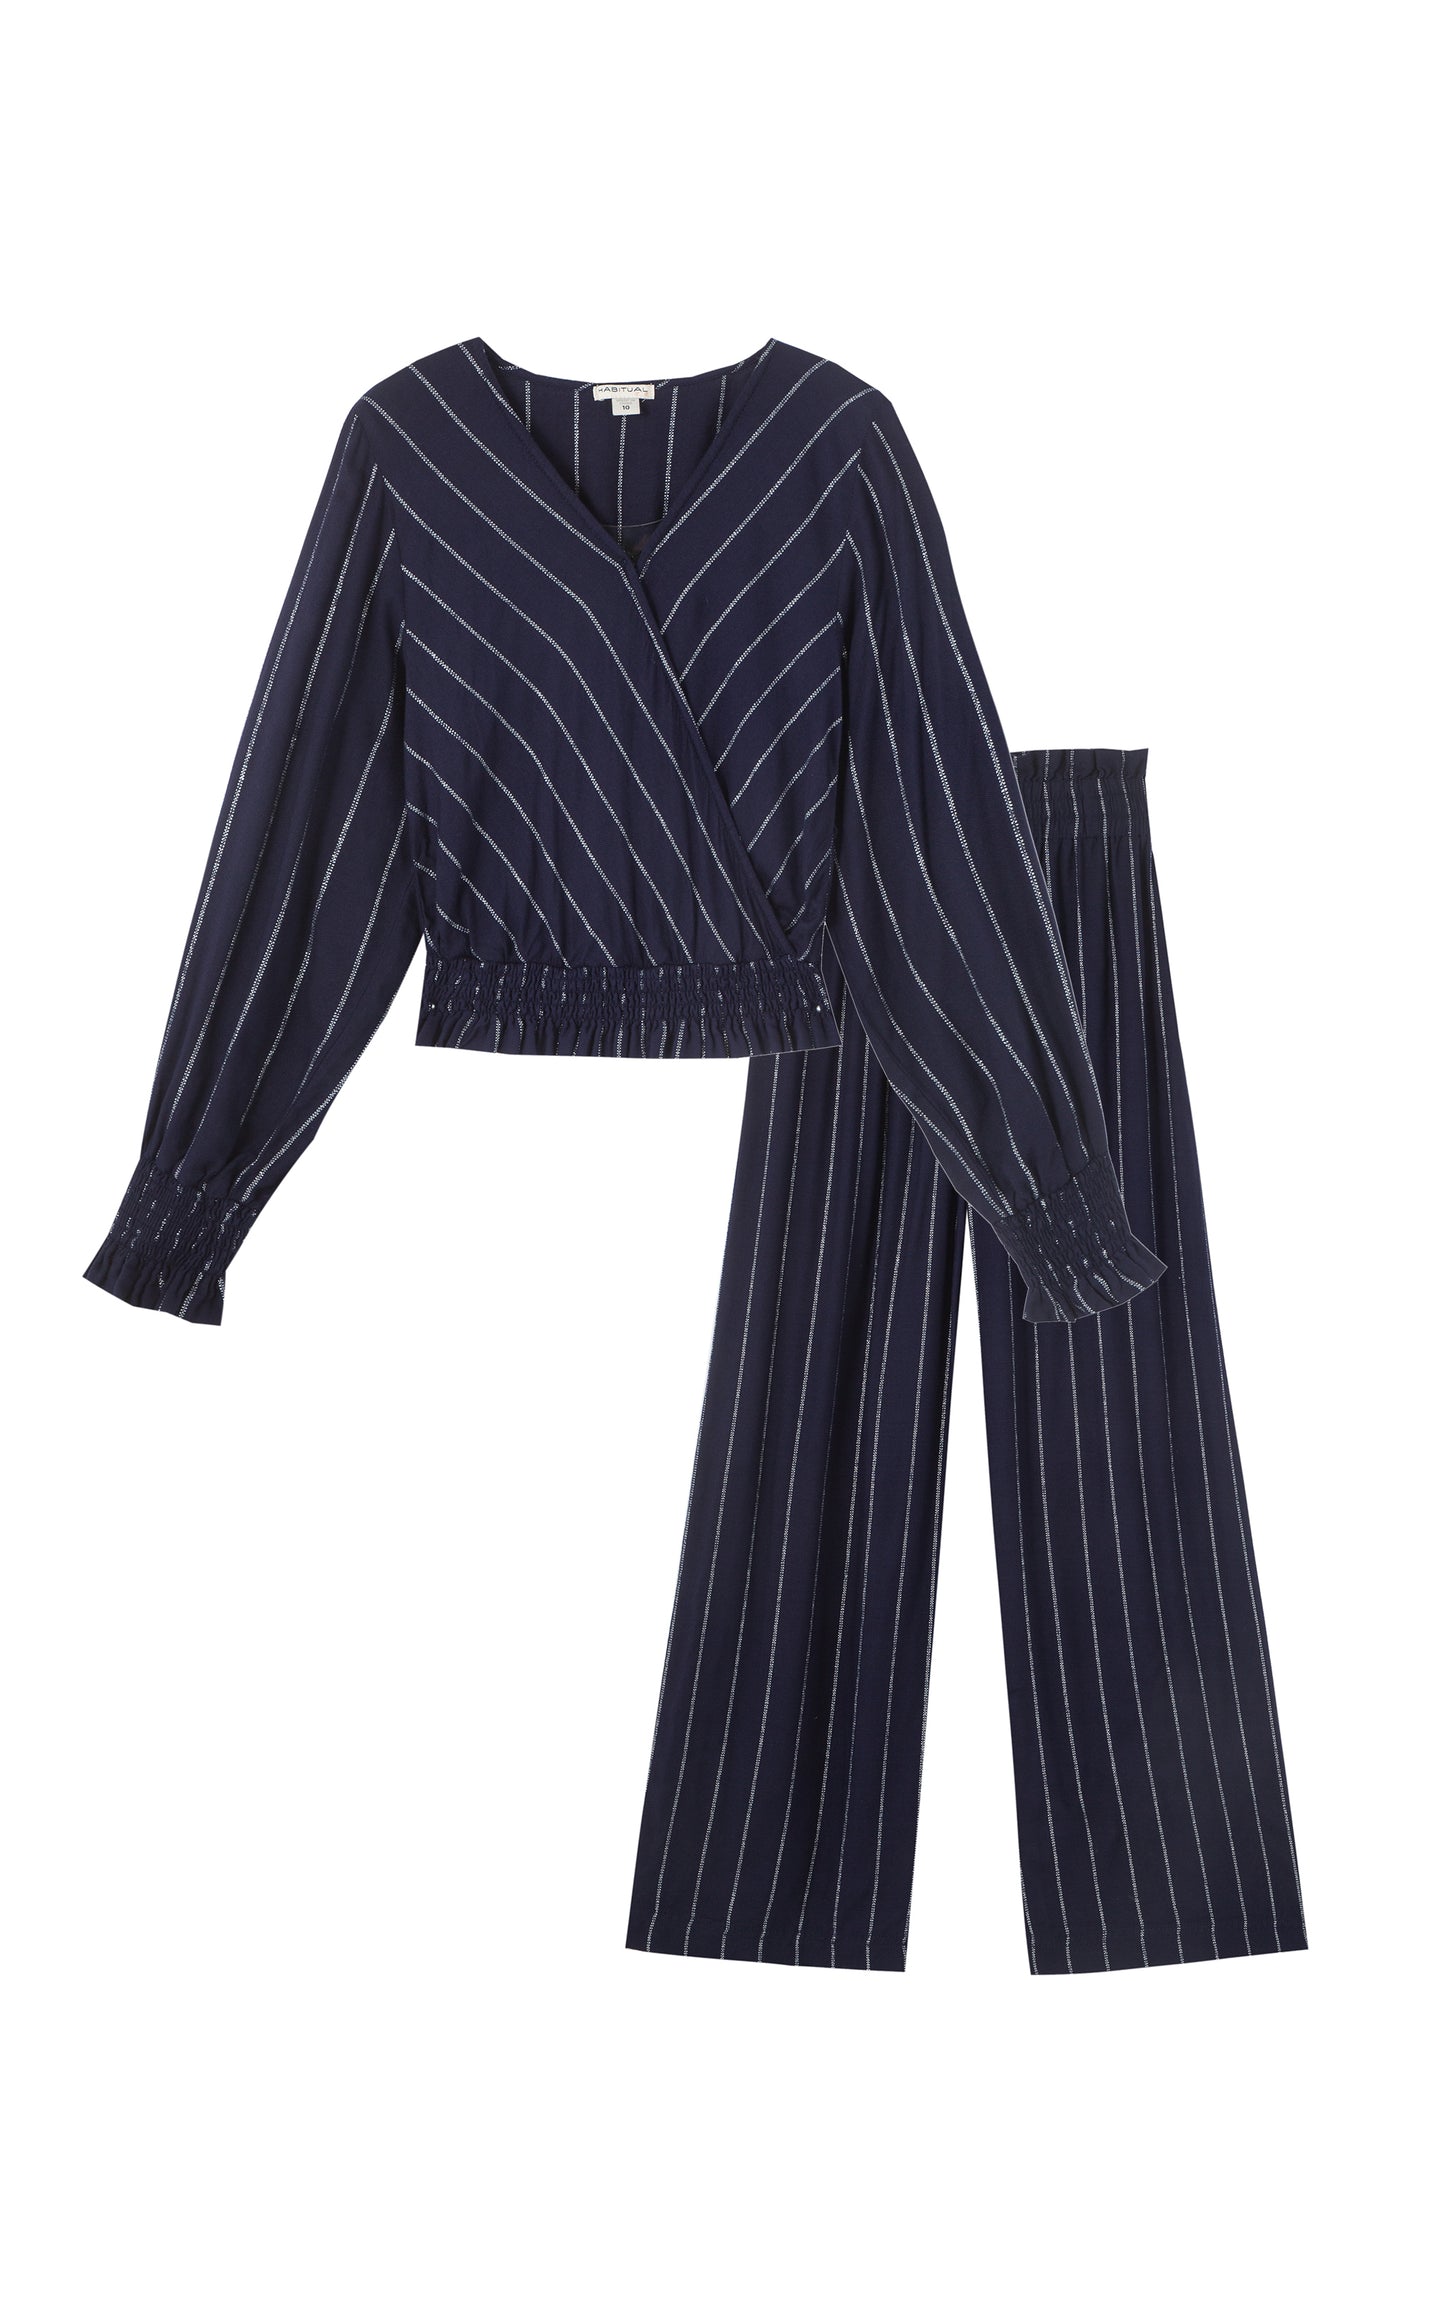 DARK BLUE WITH PALE GREY STRIPES LONG SLEEVE TOP AND MATCHING BAGGY WIDE LEG PANTS WITH SMOCKED WAIST